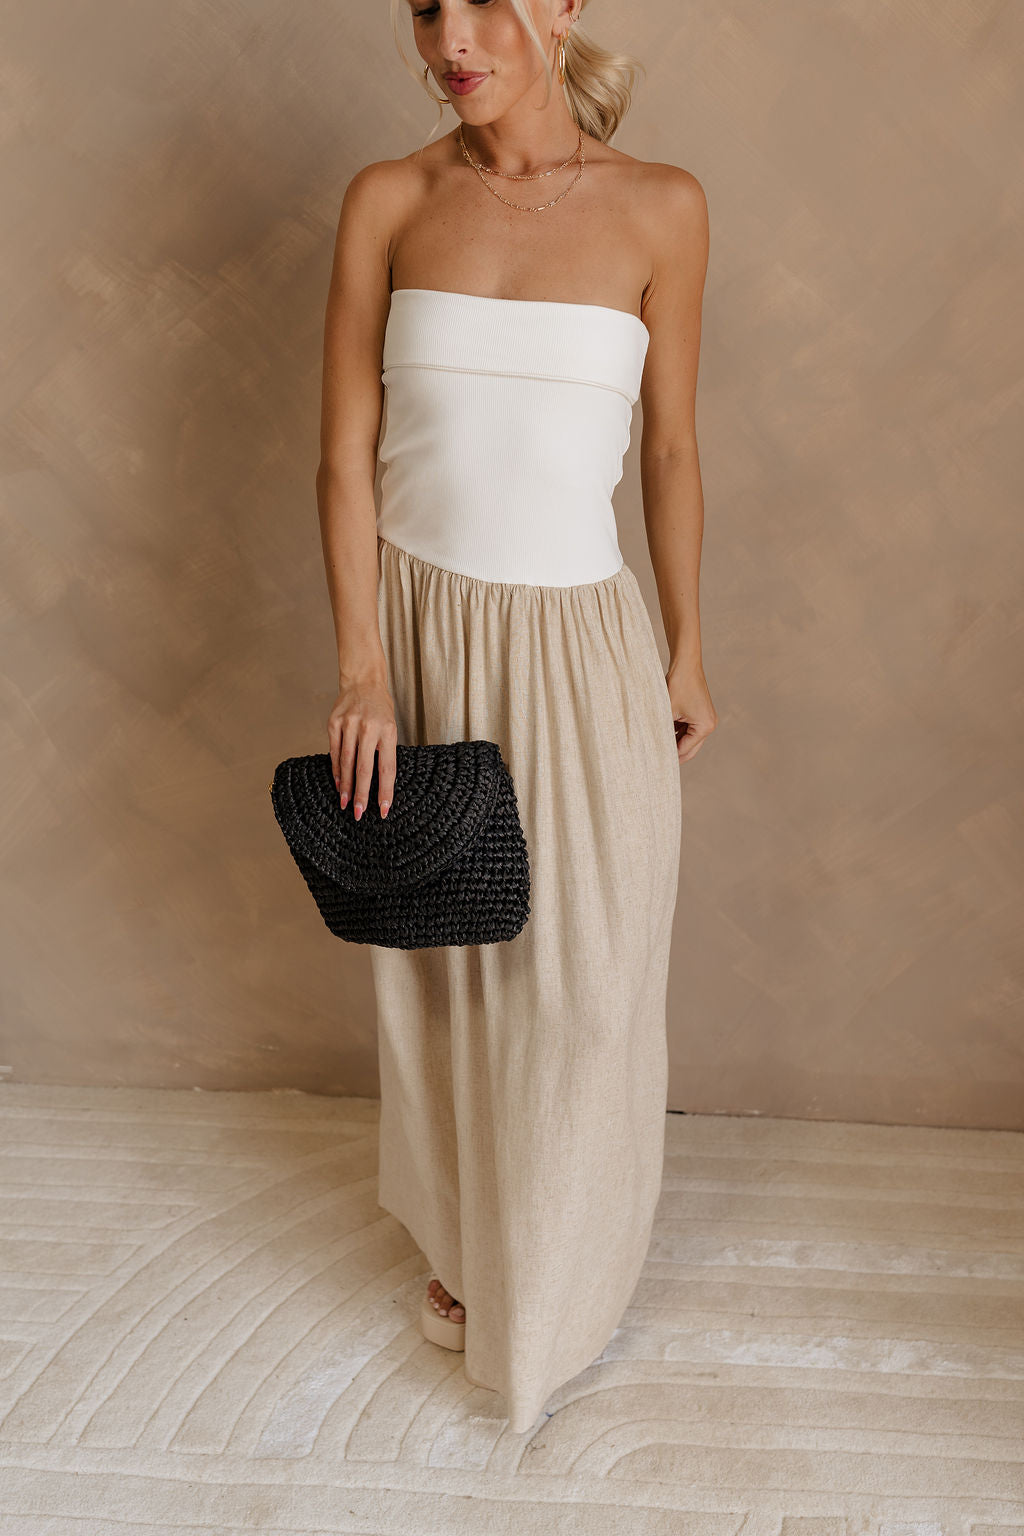 Front view of female model wearing the Ellie White & Oatmeal Strapless Maxi Dress which features White Ribbed Upper, Oatmeal Linen Fabric, Maxi Length, Back Slit Detail and Strapless